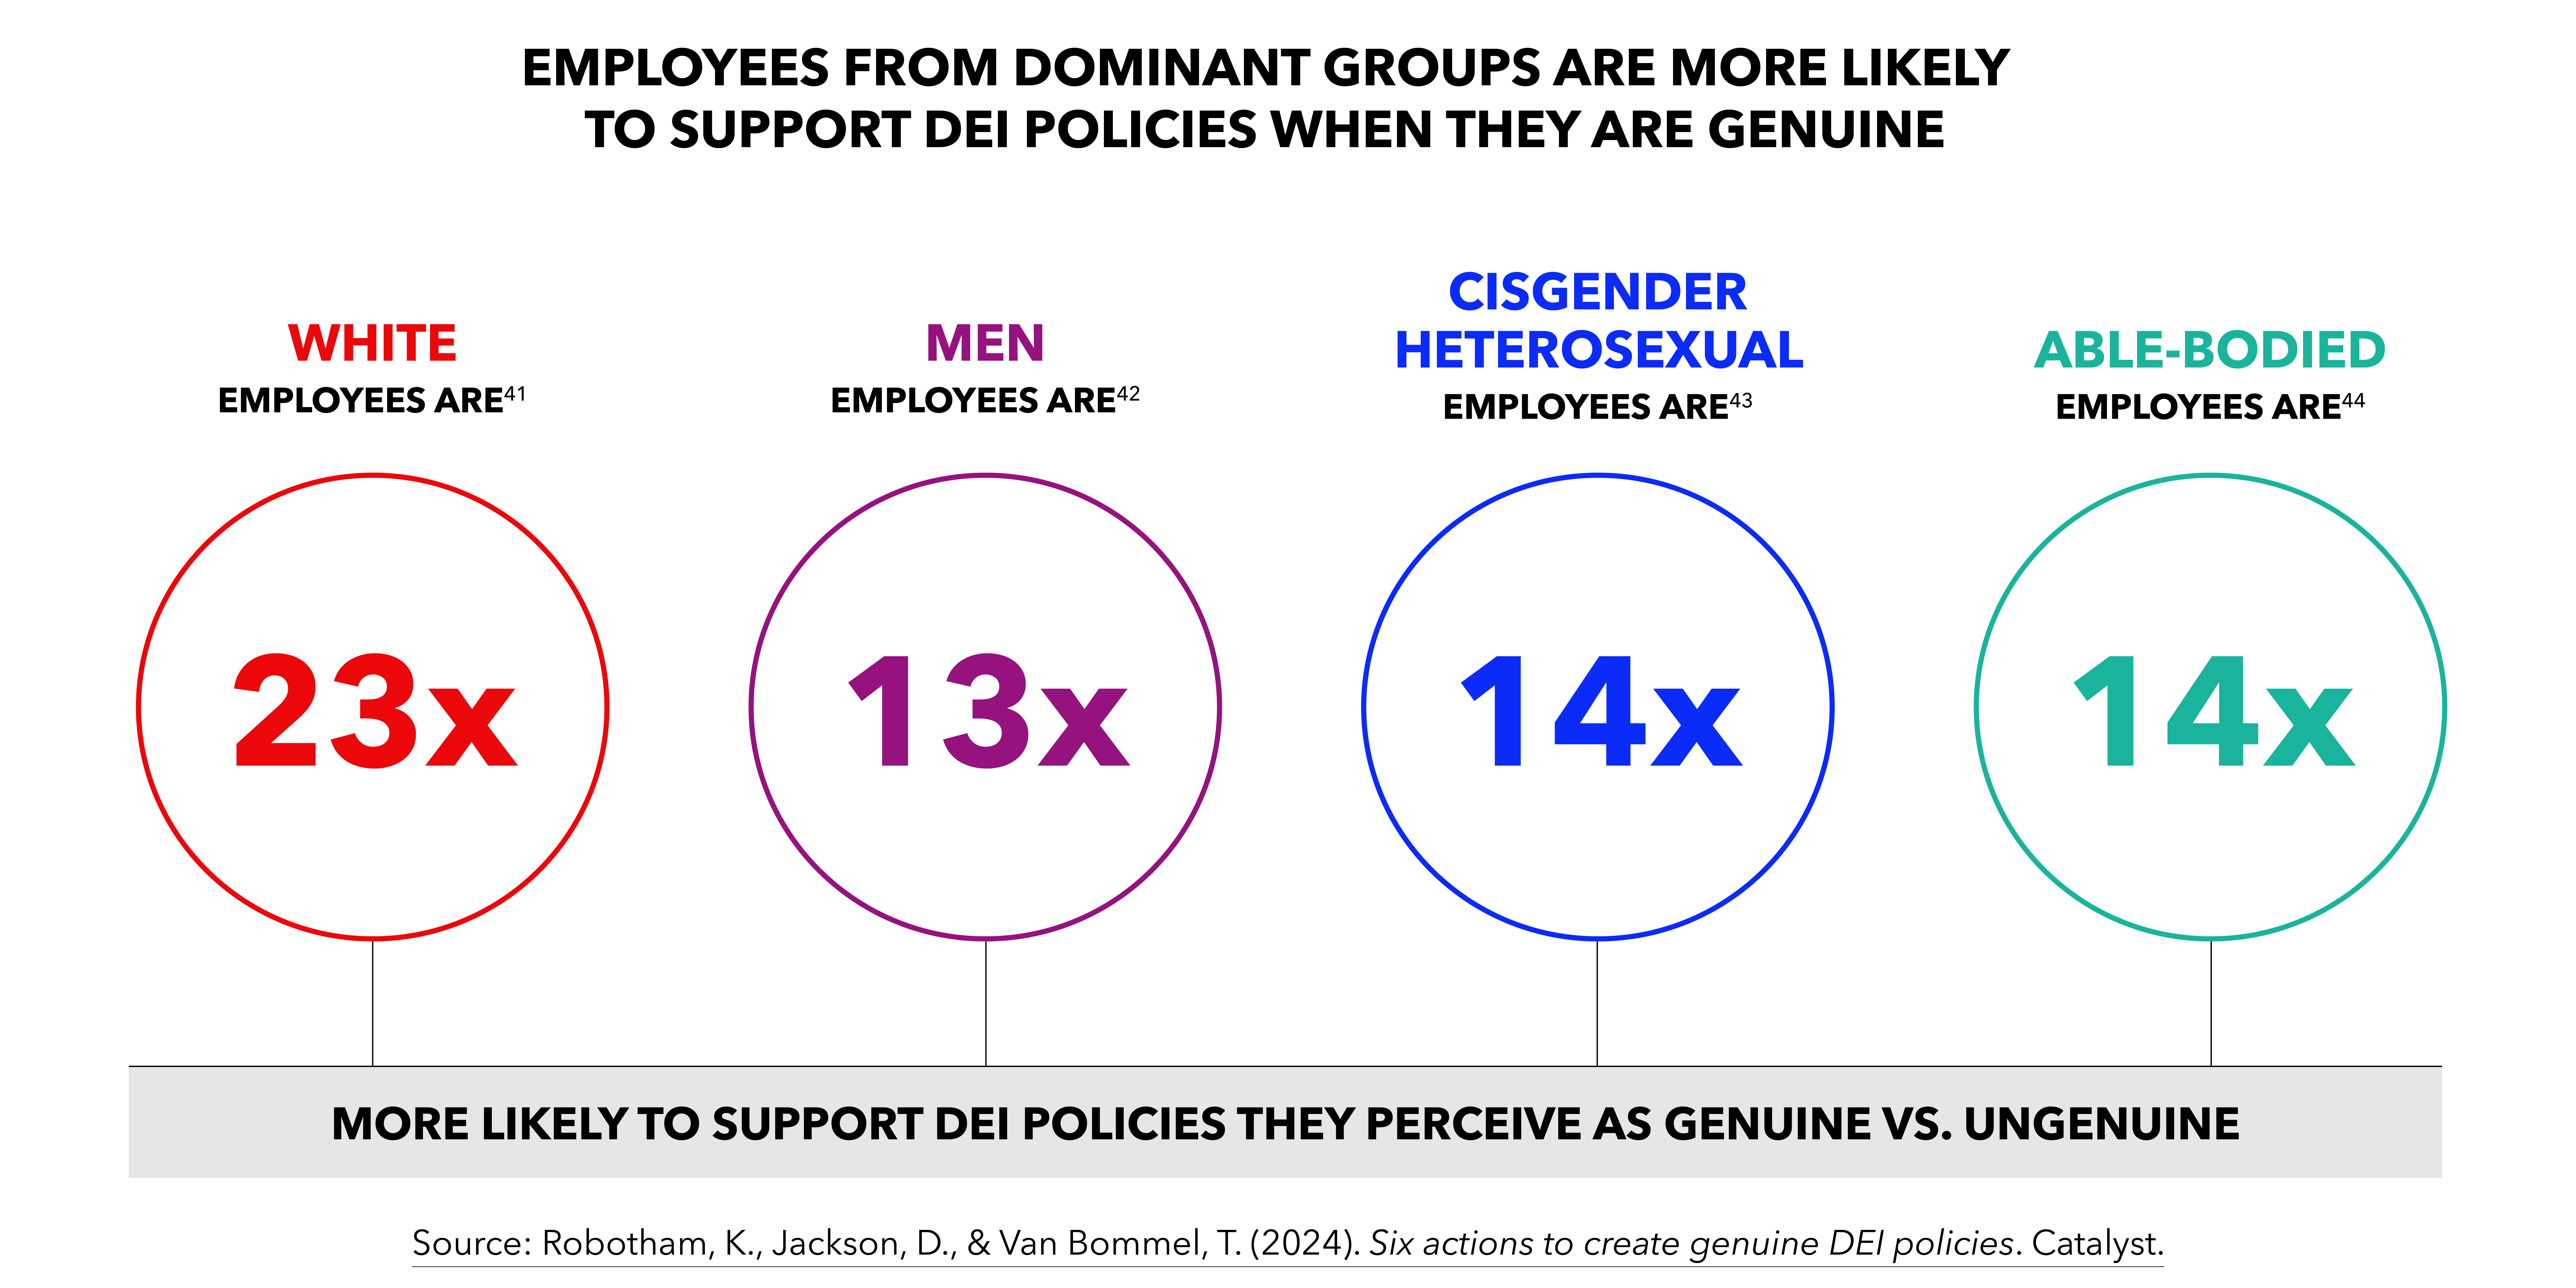 Employees from dominant groups are more likely to support DEI policies when they are genuine.